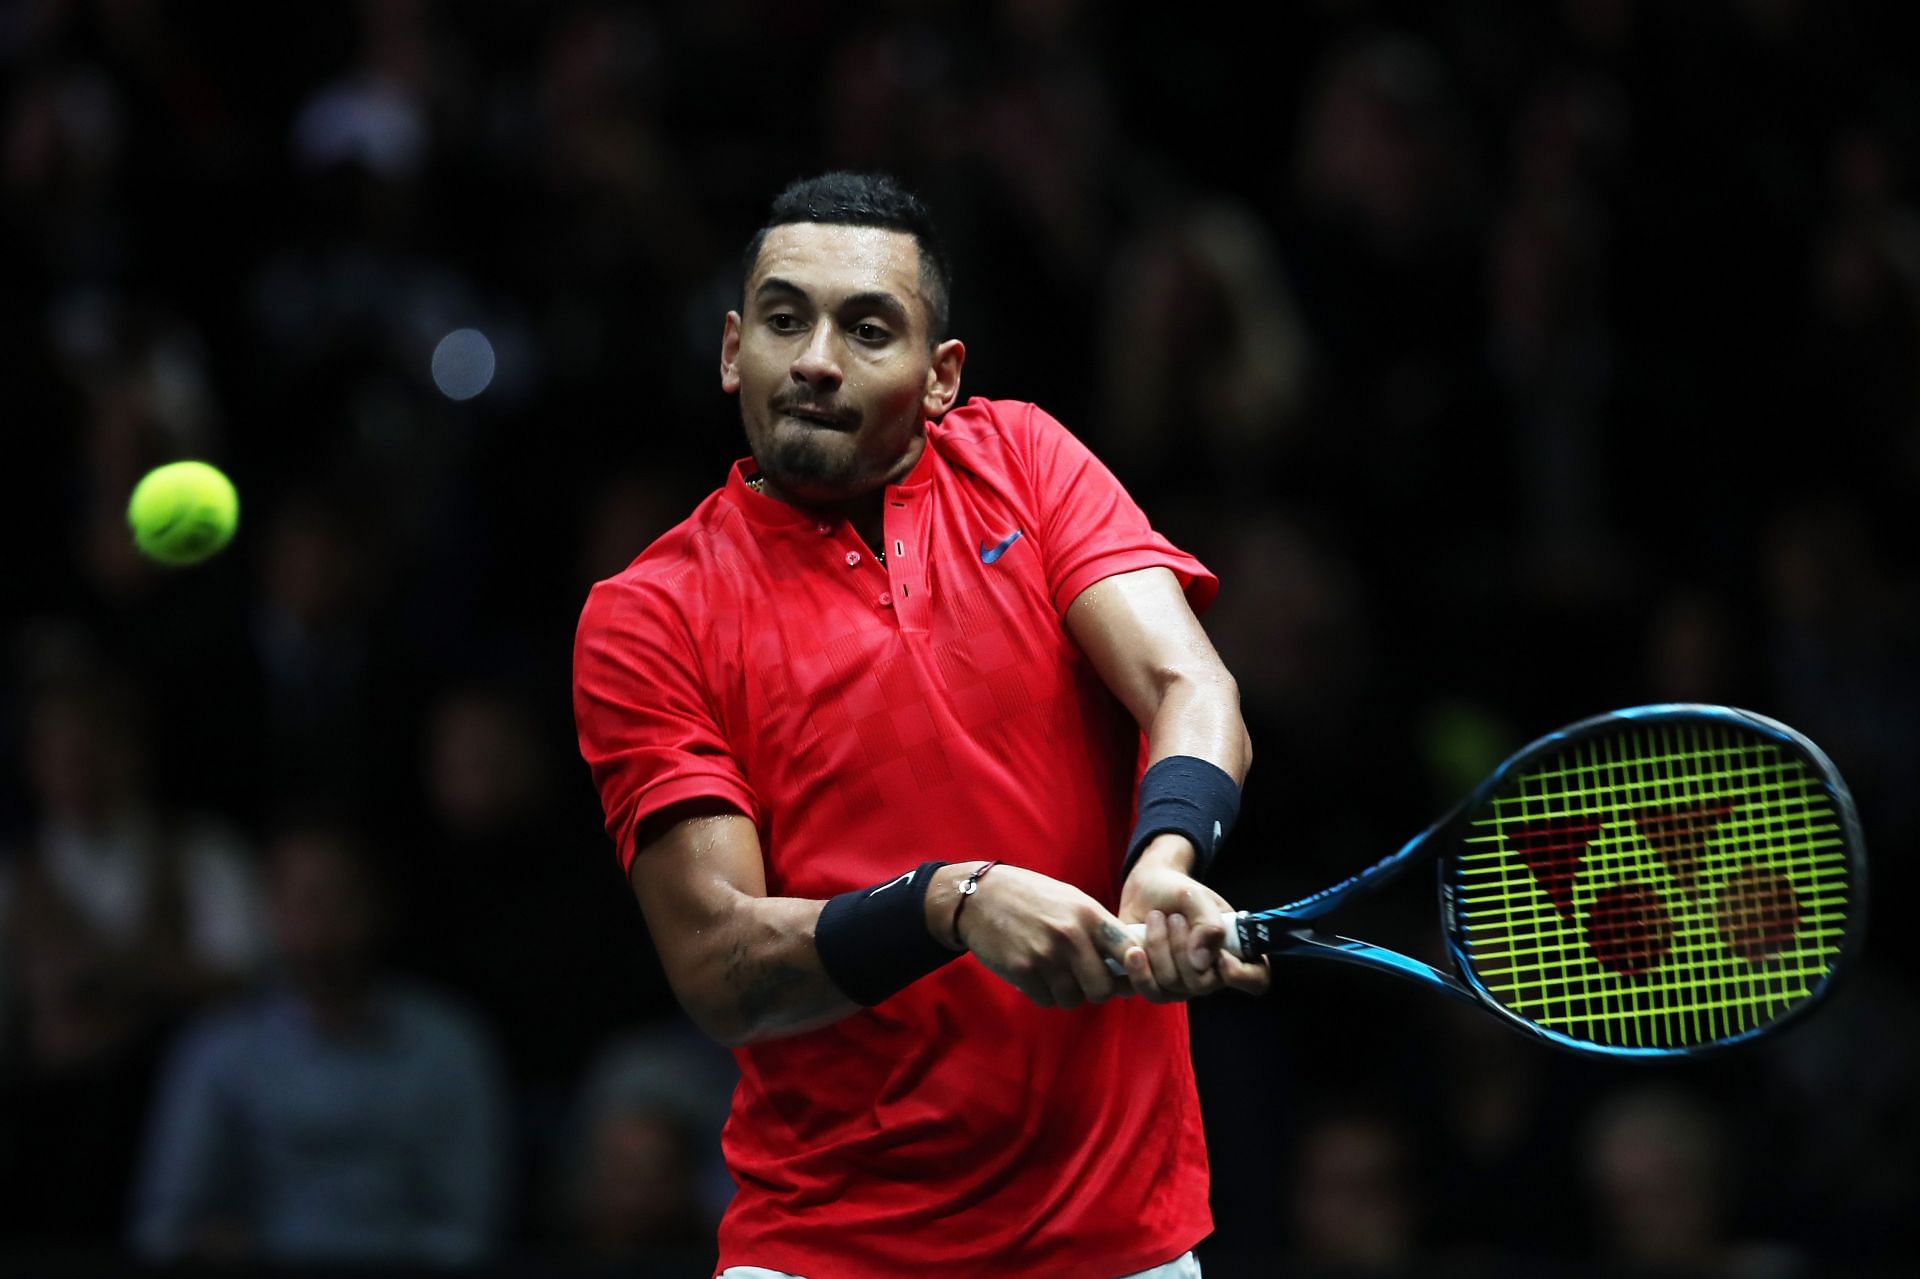 Nick Kyrgios during his match against Roger Federer at the 2017 Laver Cup - Getty Images